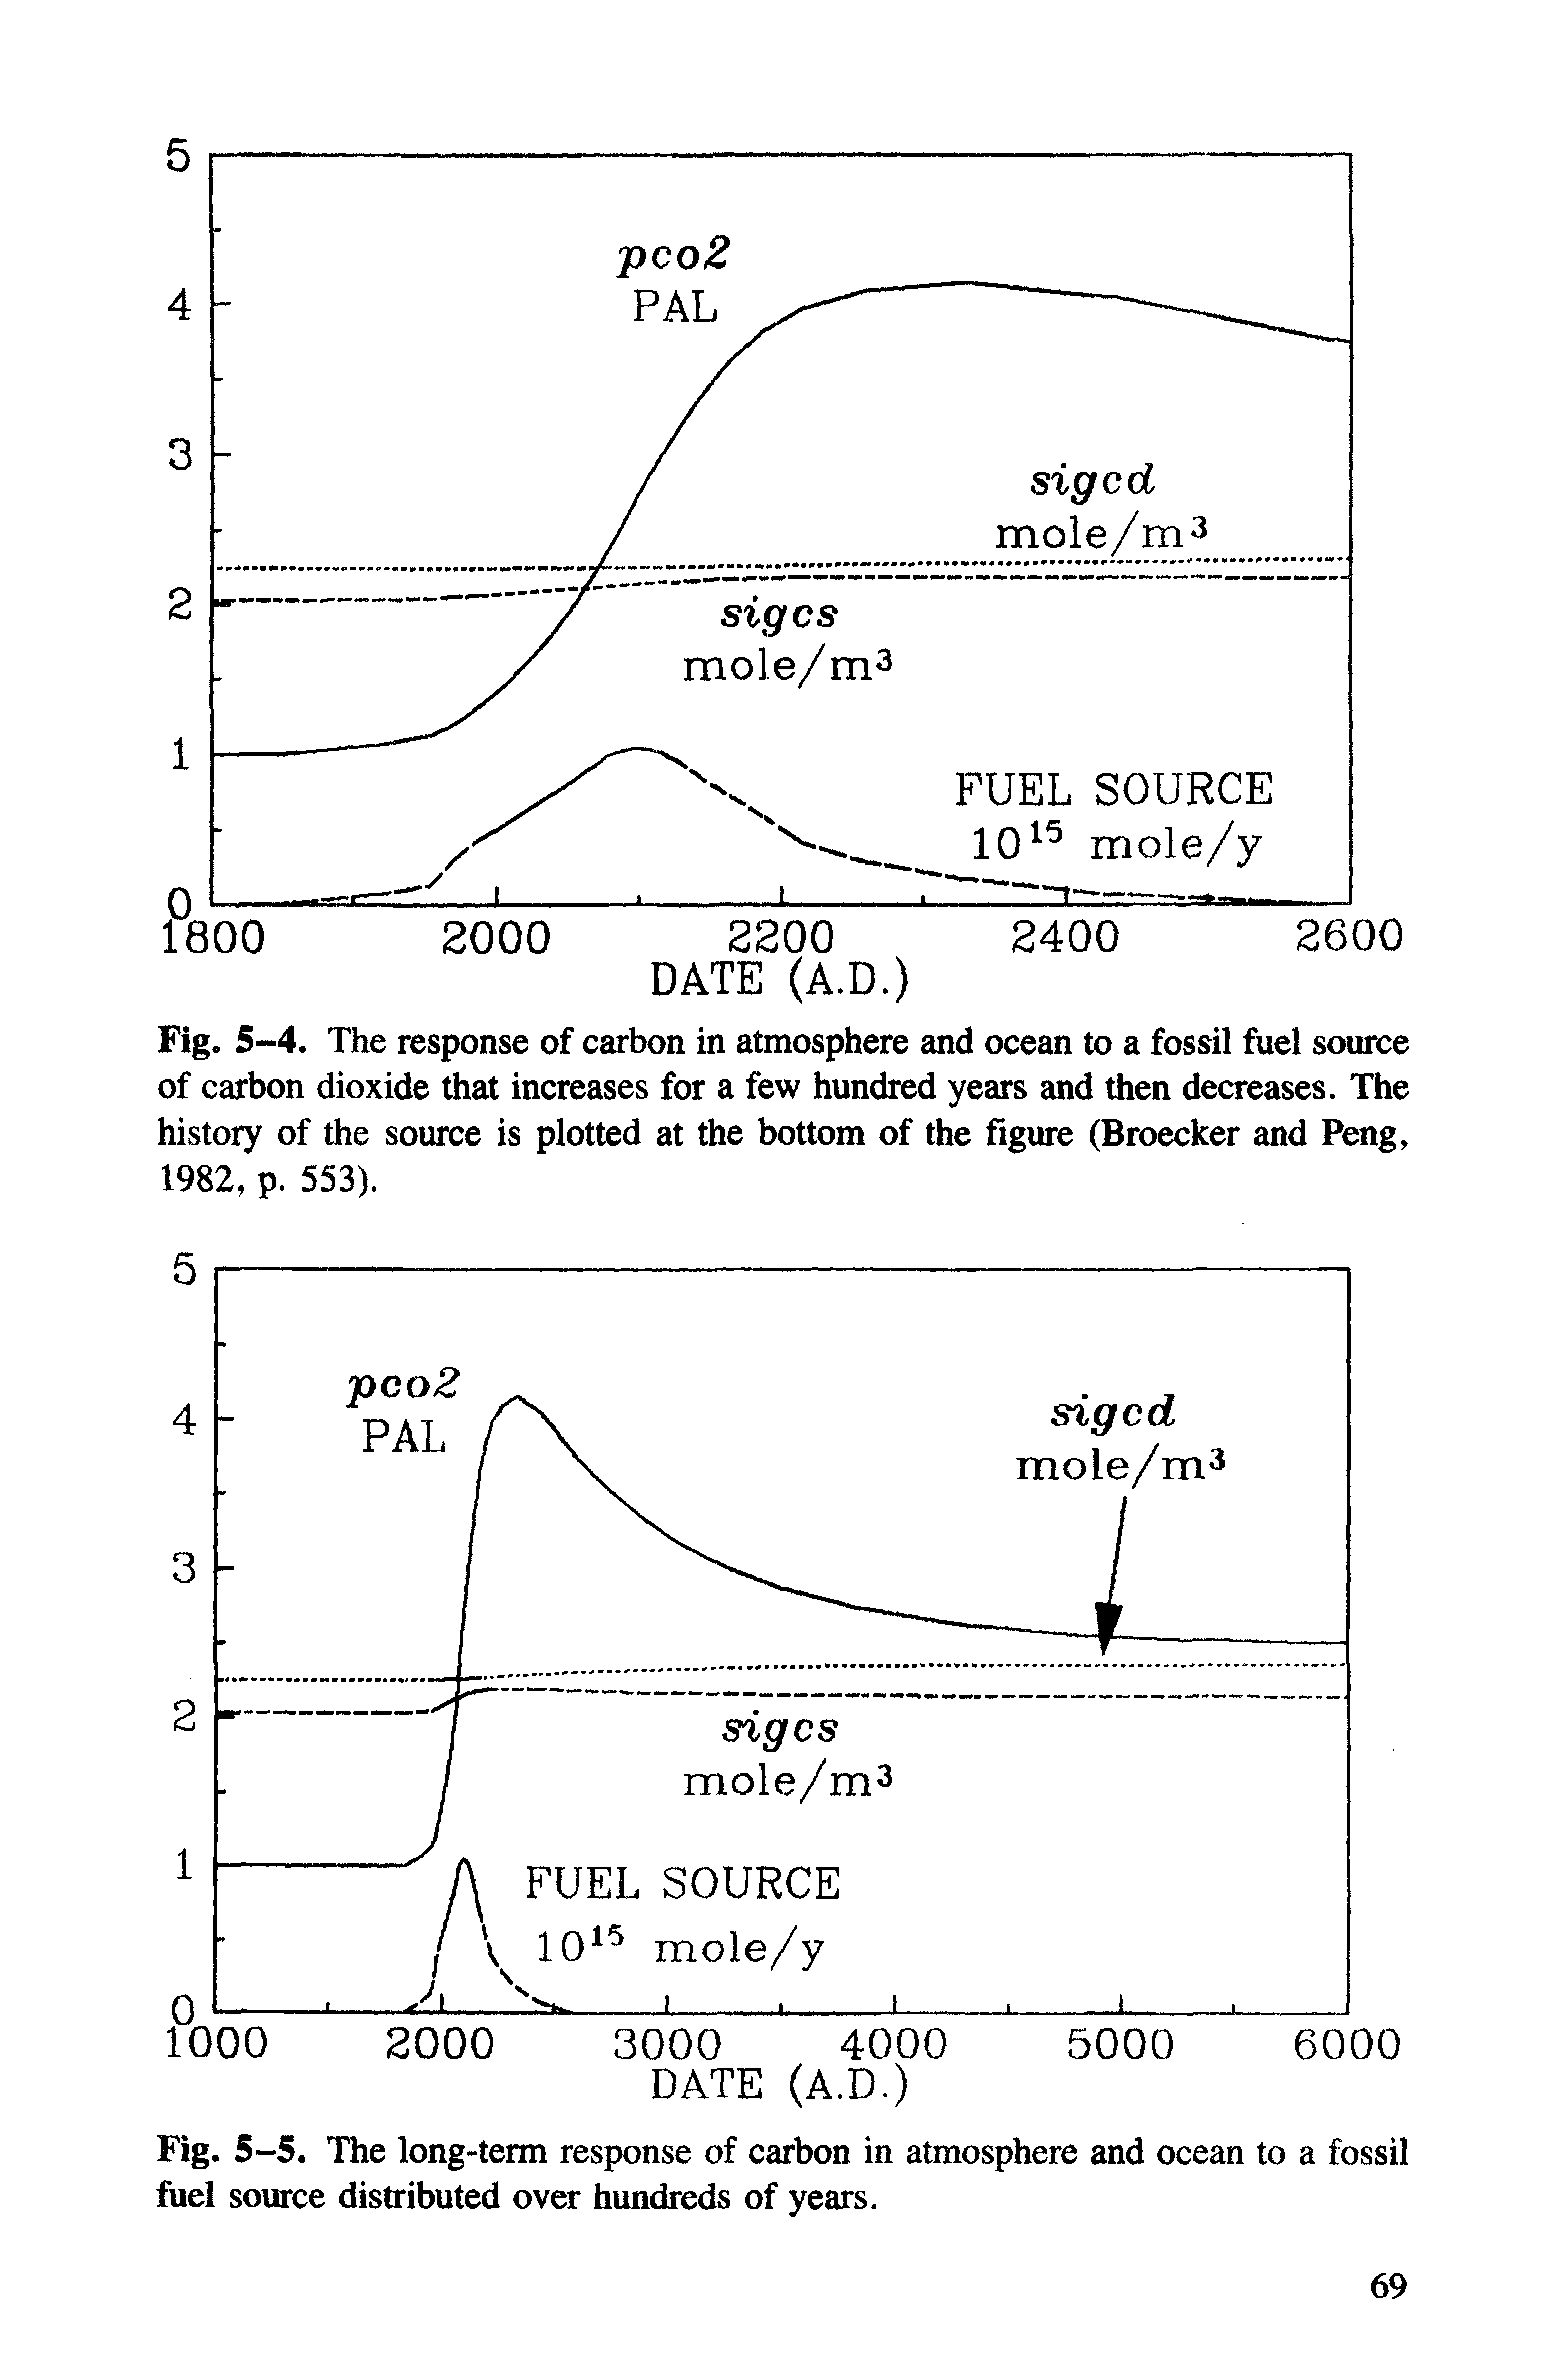 Fig. 5-4. The response of carbon in atmosphere and ocean to a fossil fuel source of carbon dioxide that increases for a few hundred years and then decreases. The history of the source is plotted at the bottom of the figure (Broecker and Peng, 1982, p. 553).